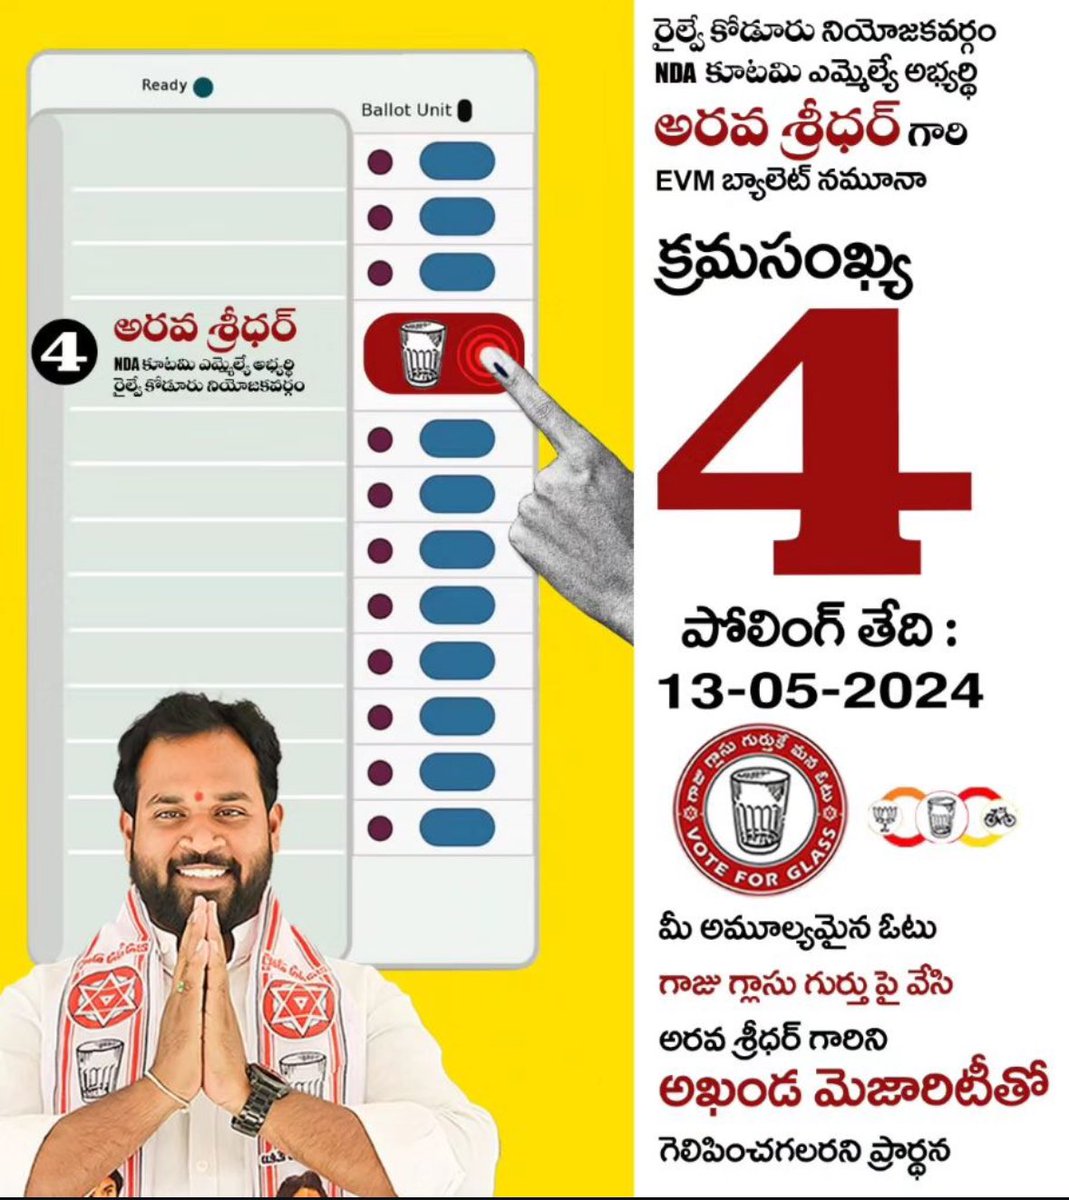 Presenting you JSP MLA candidate Arava Sreedhar from Railway Kodur Constituency. Please vote for TDP-JSP Alliance in your constituency🙏